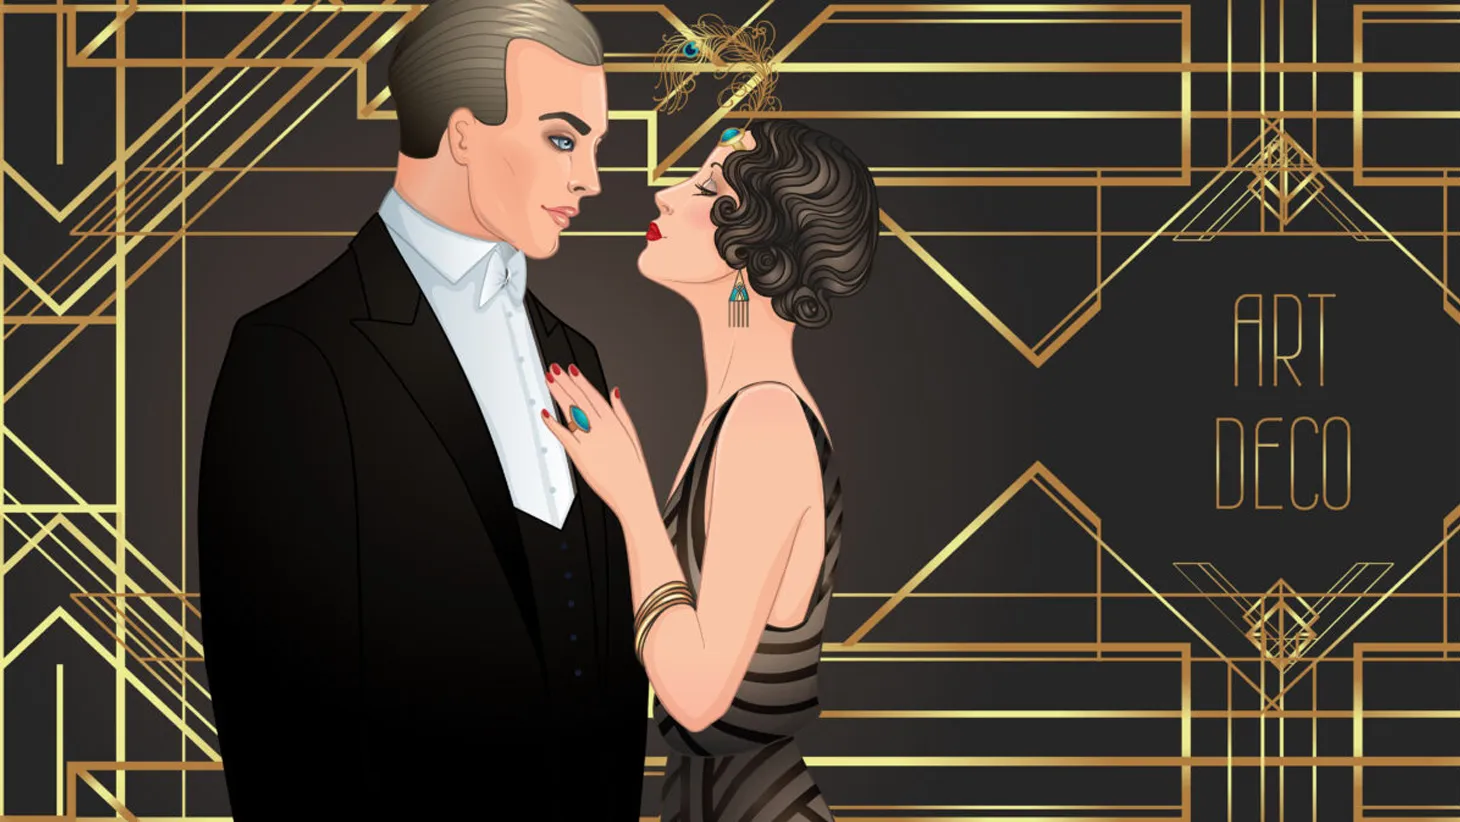 The Great Gatsby – Themes & Expert Analysis